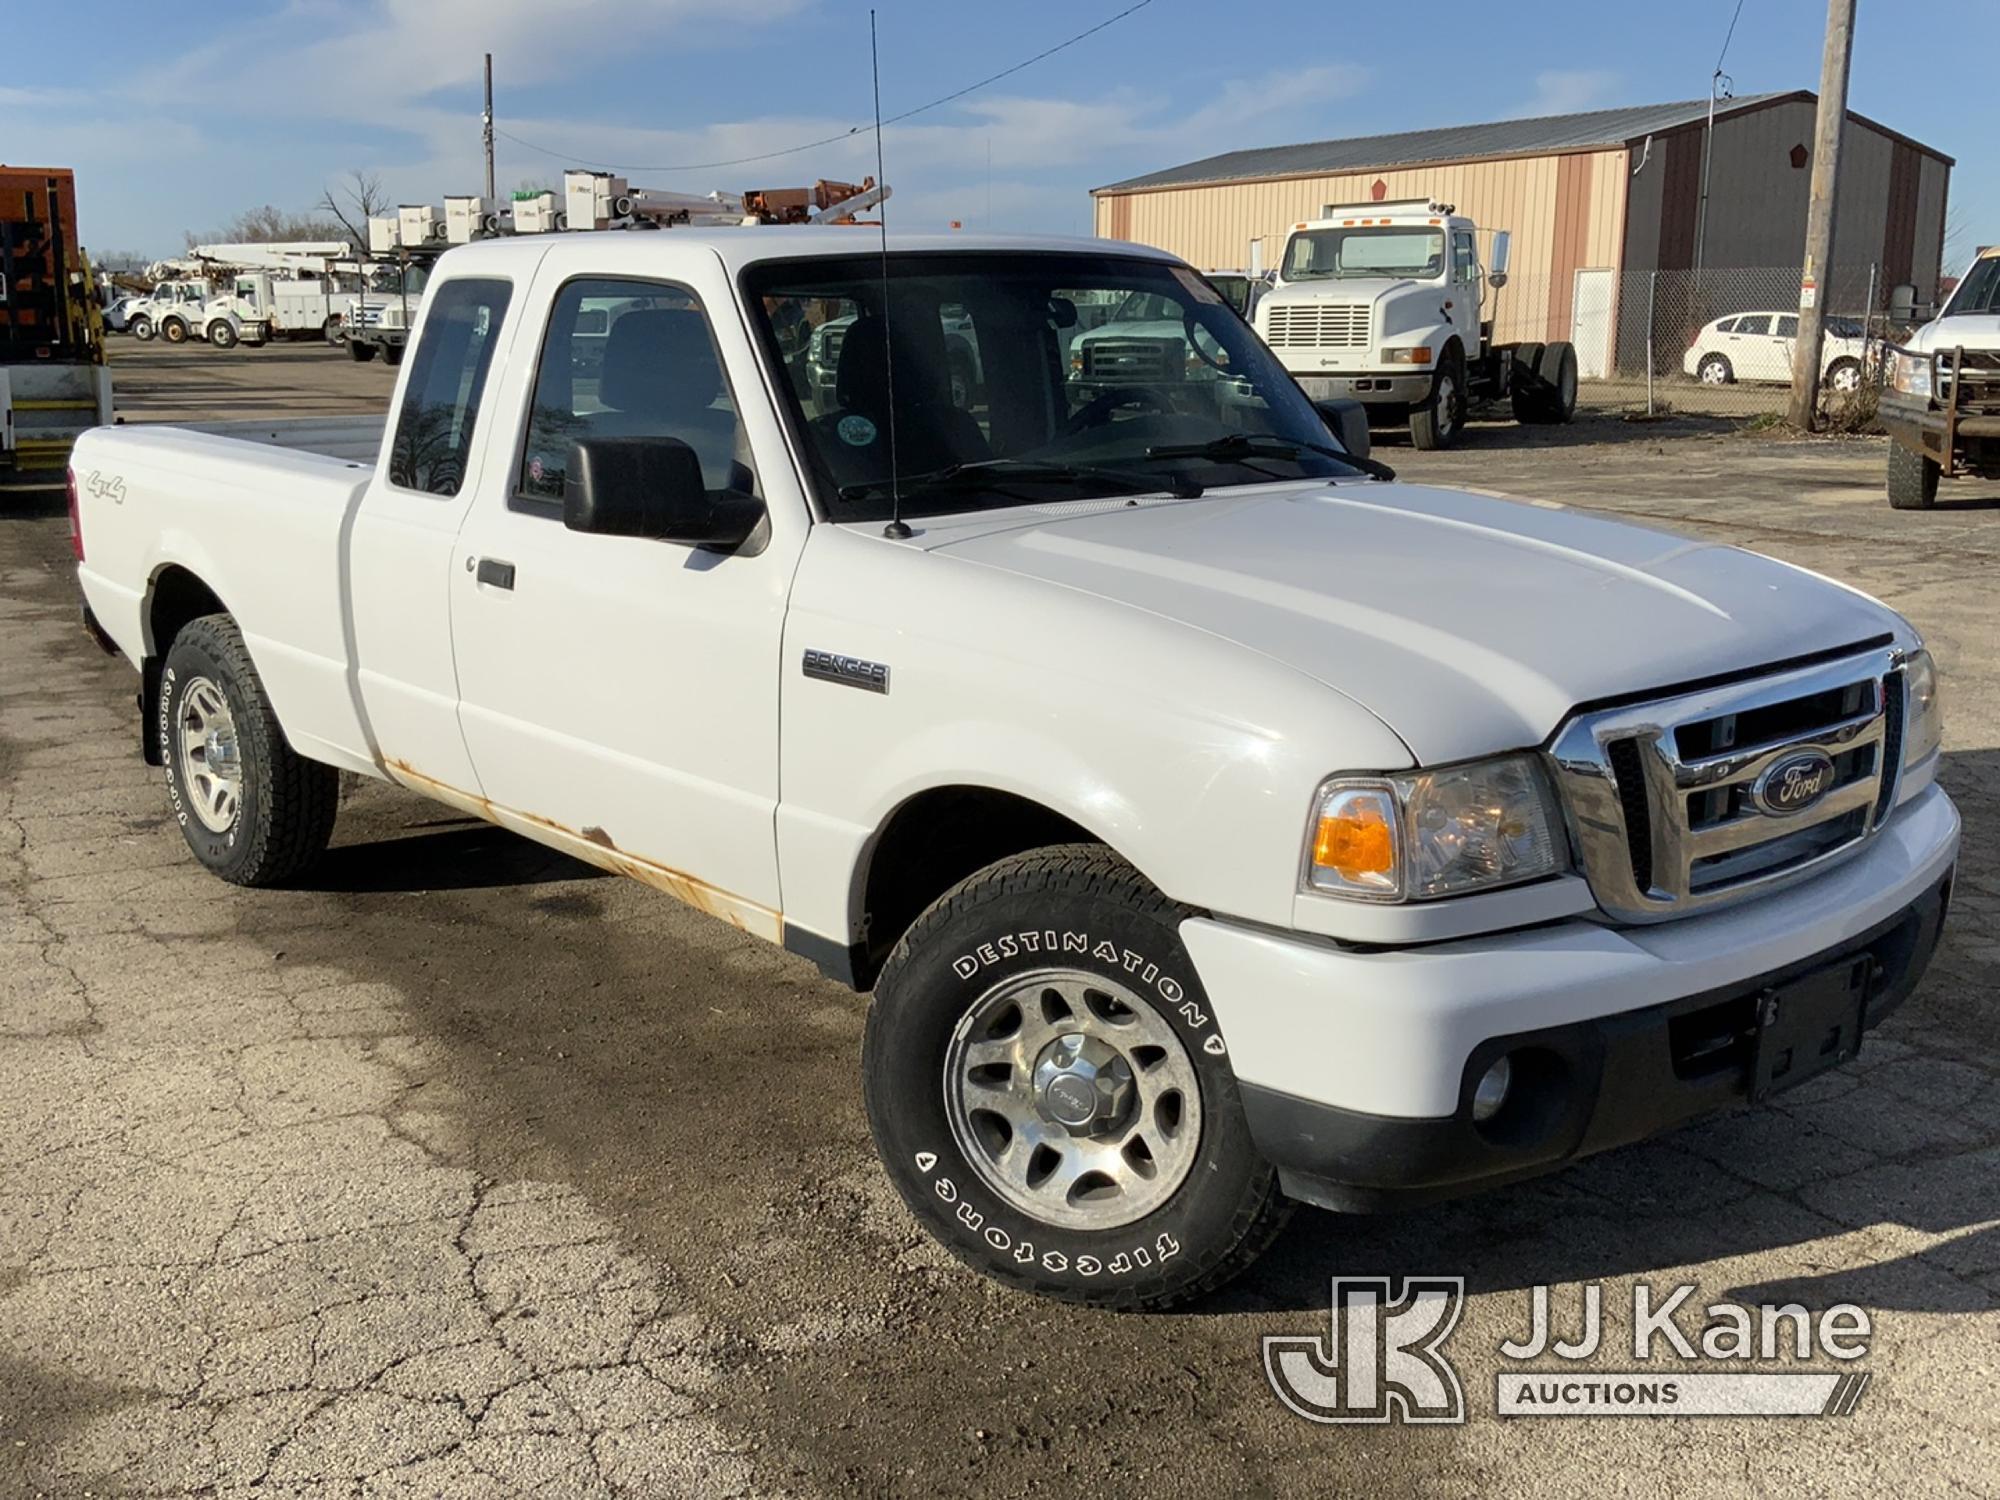 (South Beloit, IL) 2011 Ford Ranger 4x4 Extended-Cab Pickup Truck Runs & Moves